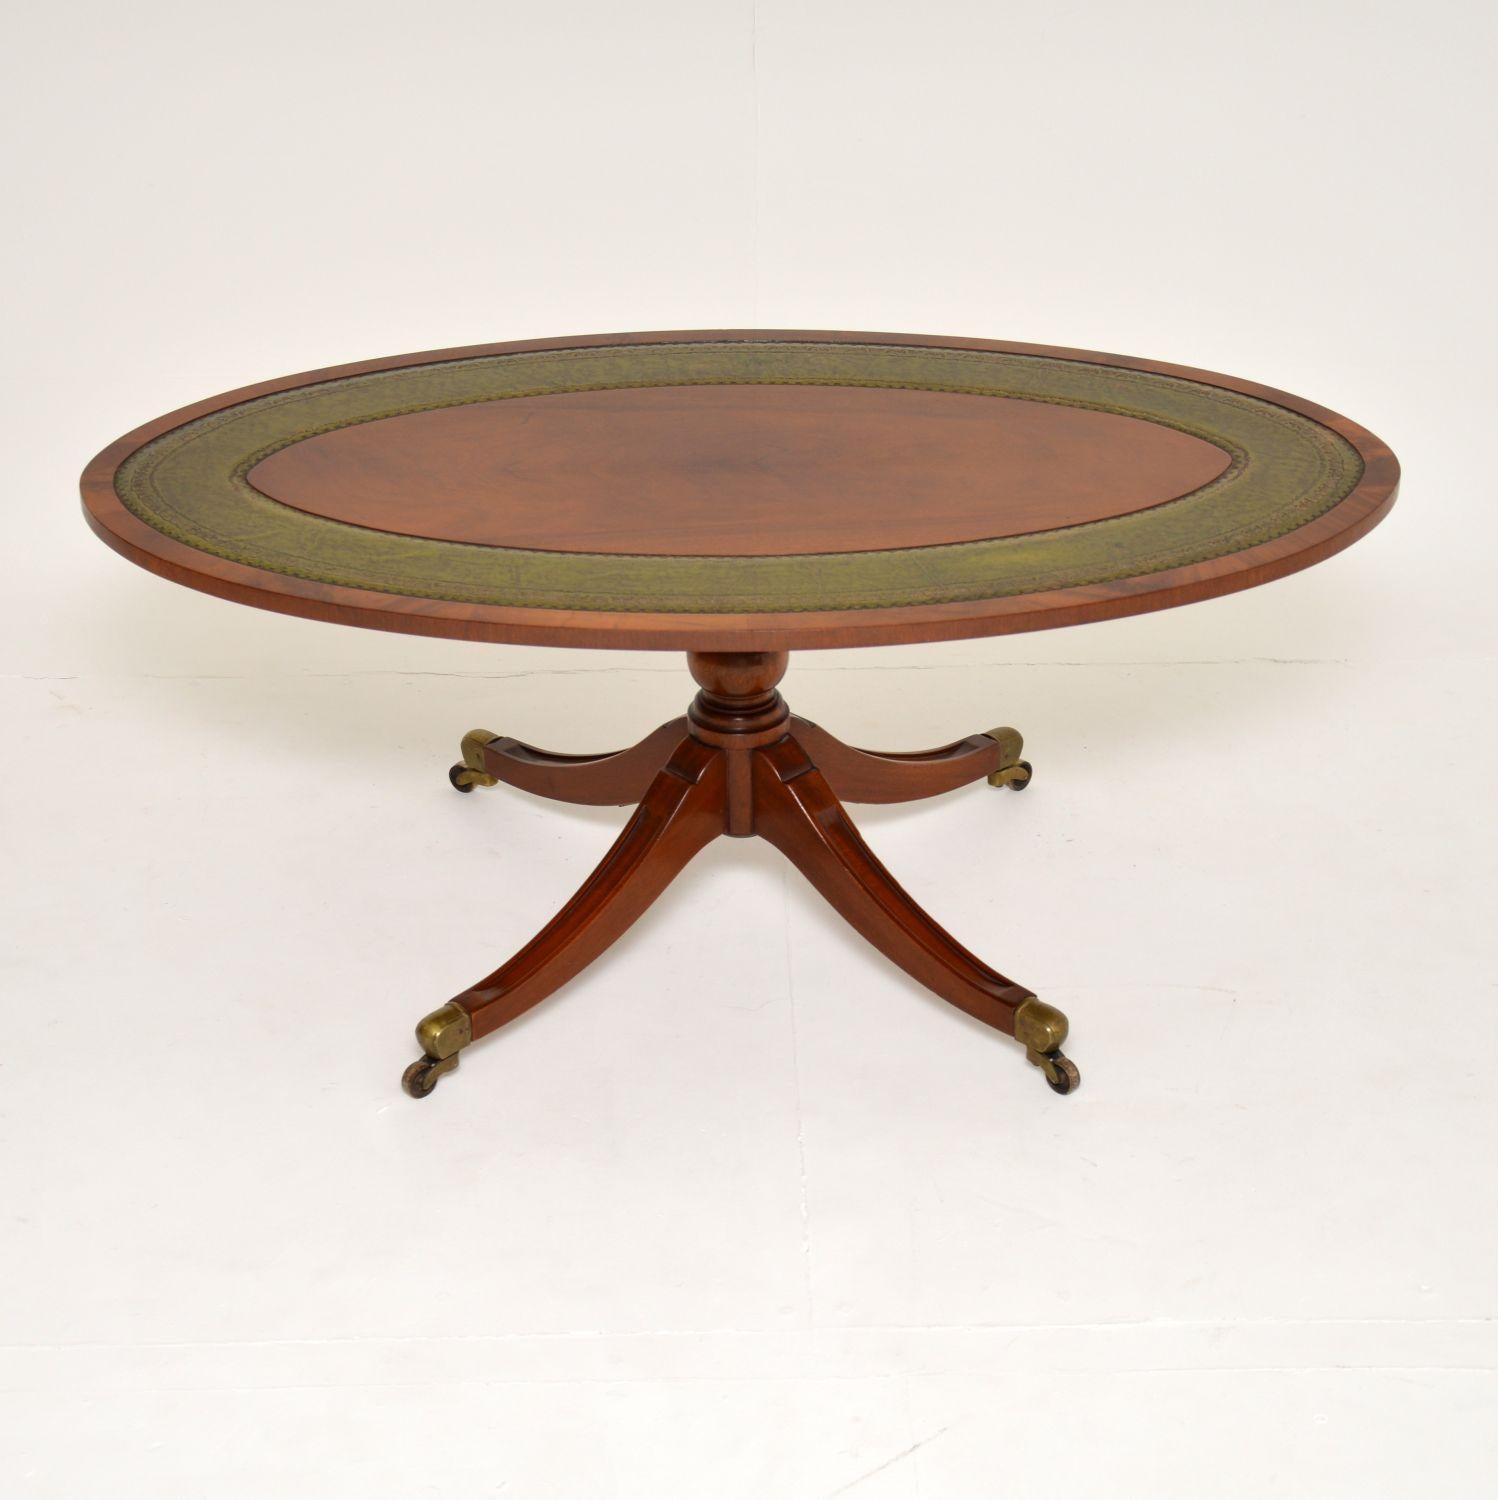 A beautifully made antique Regency style coffee table in wood and leather. This was made in England, it dates from around the 1950’s.

The quality is excellent, this is a great size. The oval top has inset tooled green leather. It sits on a